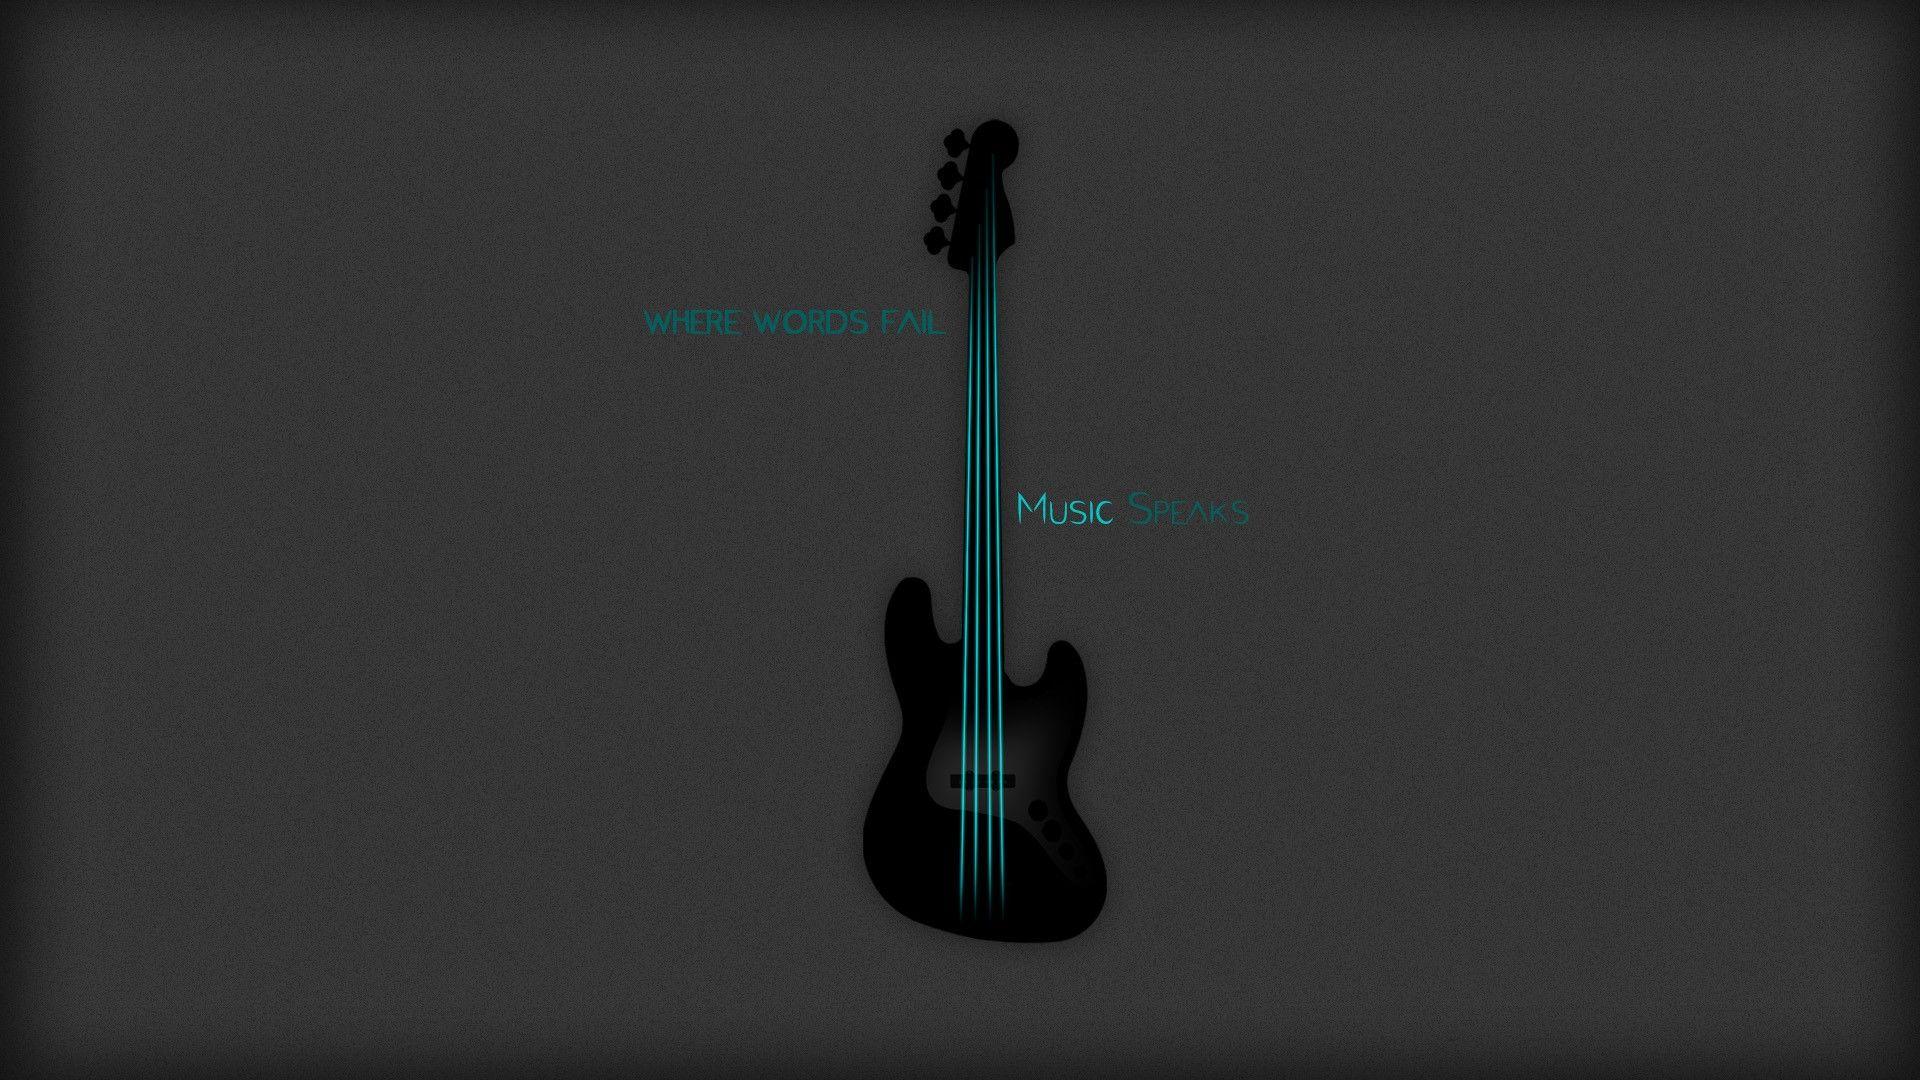 Wallpaper.wiki Bass Guitar Background Free Download PIC WPC001493